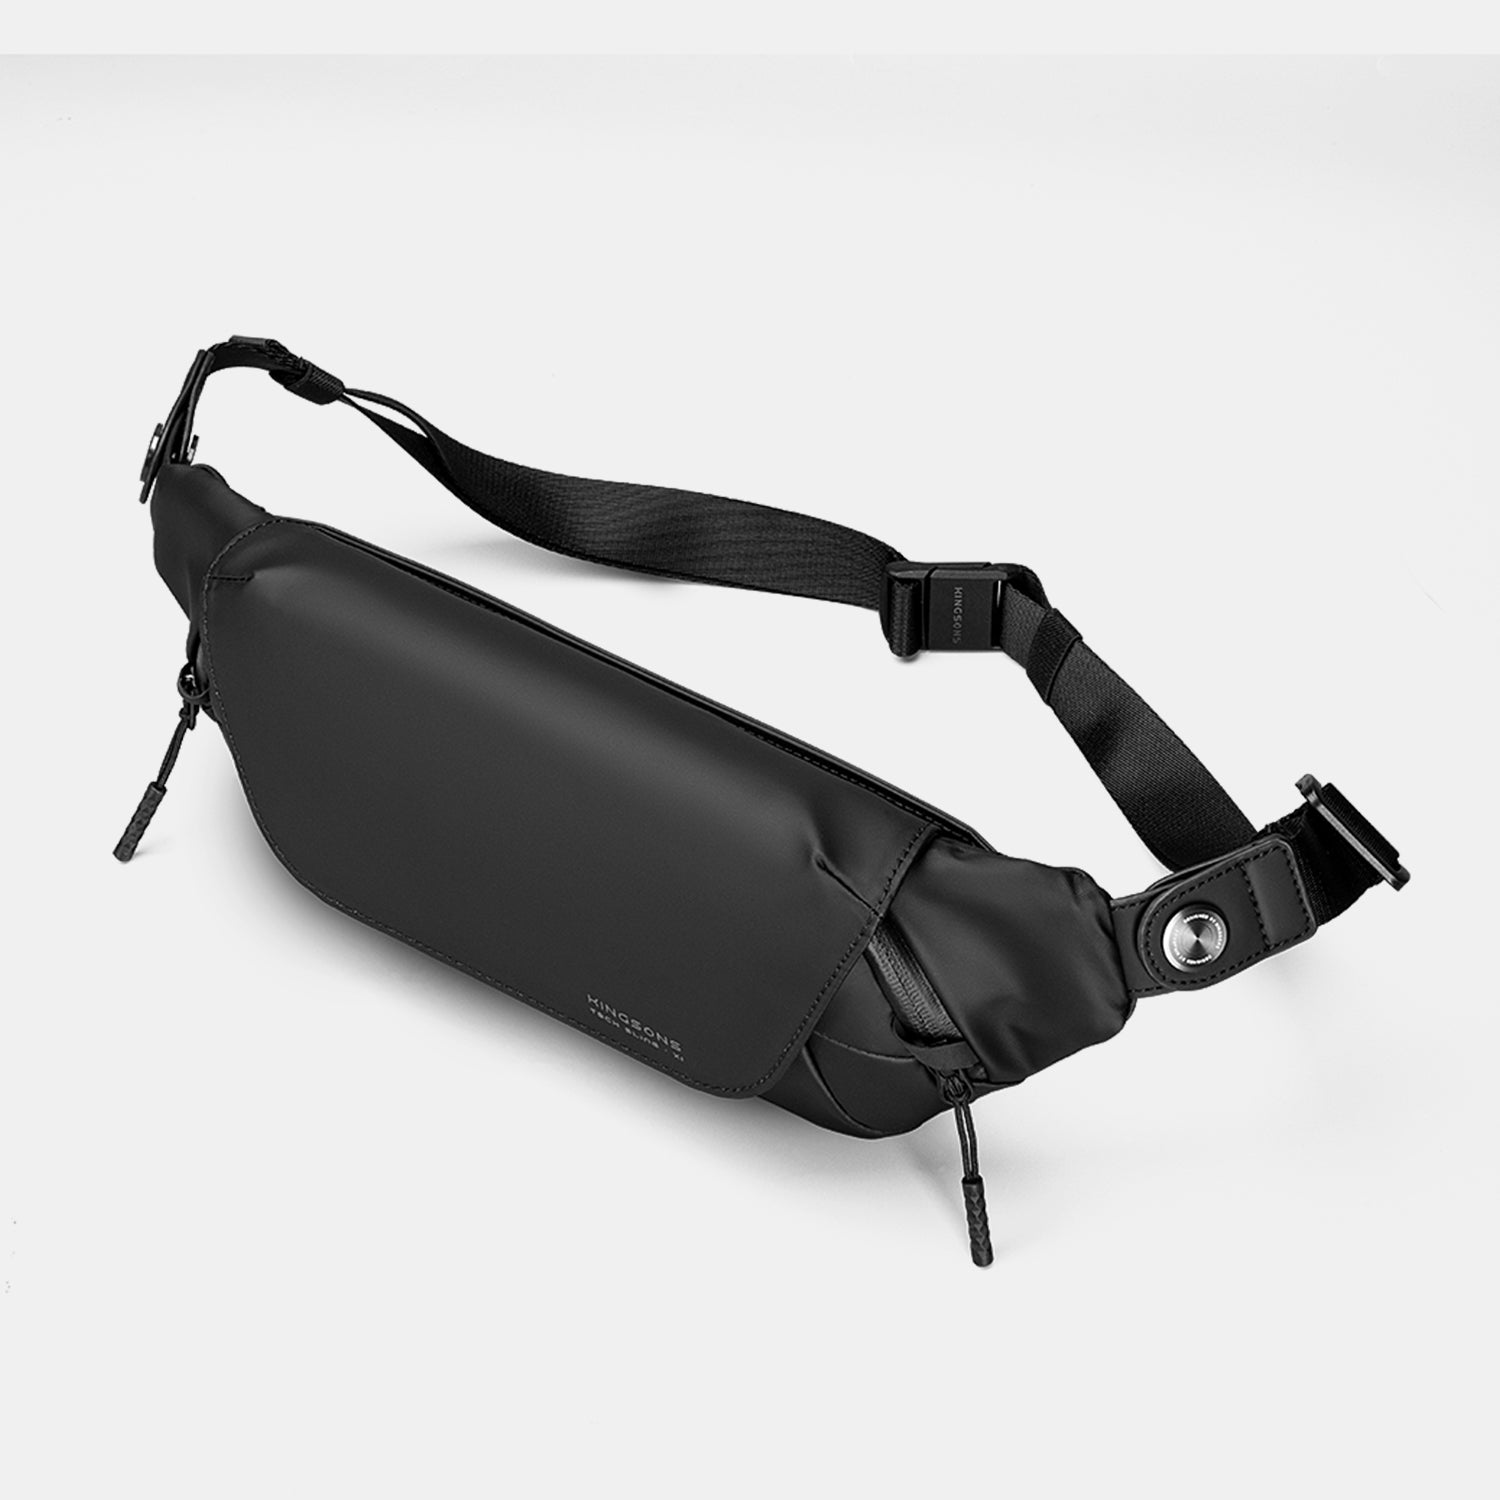 Kingsons Sling Bag for Men - Waterproof and Compact Crossbody Chest Bag